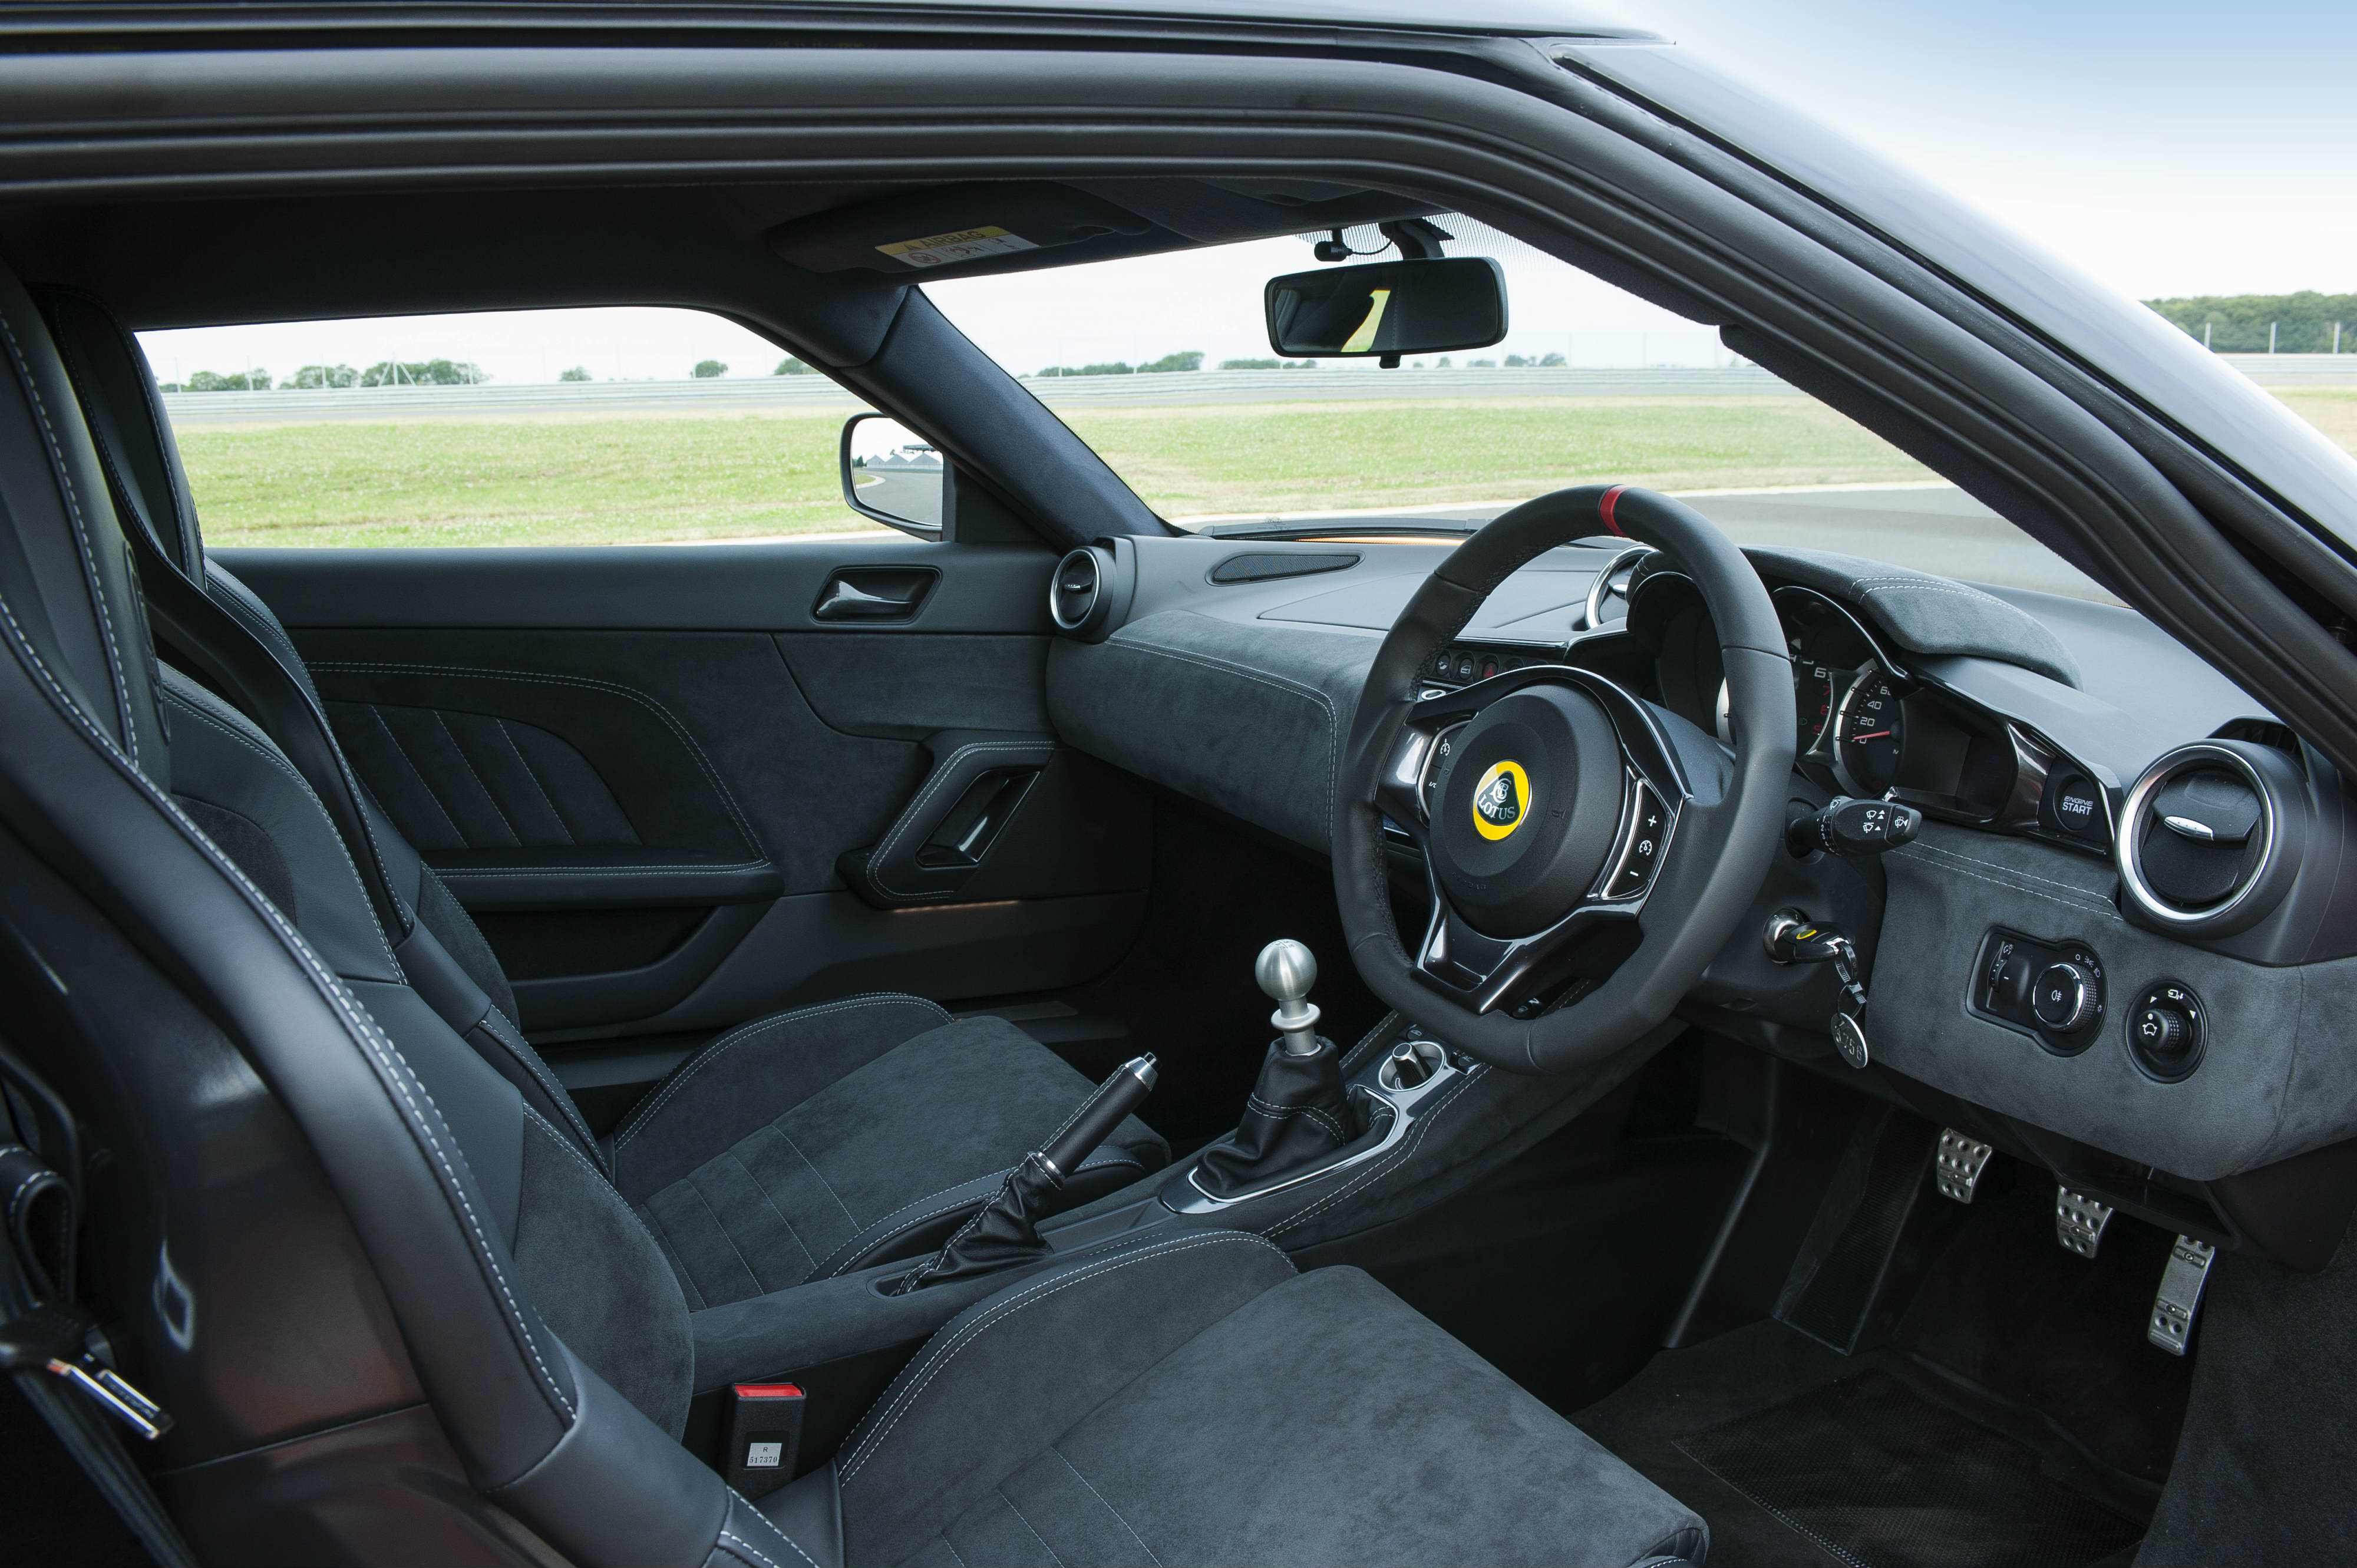 Lotus Evora 400 review The Sunday Times Driving